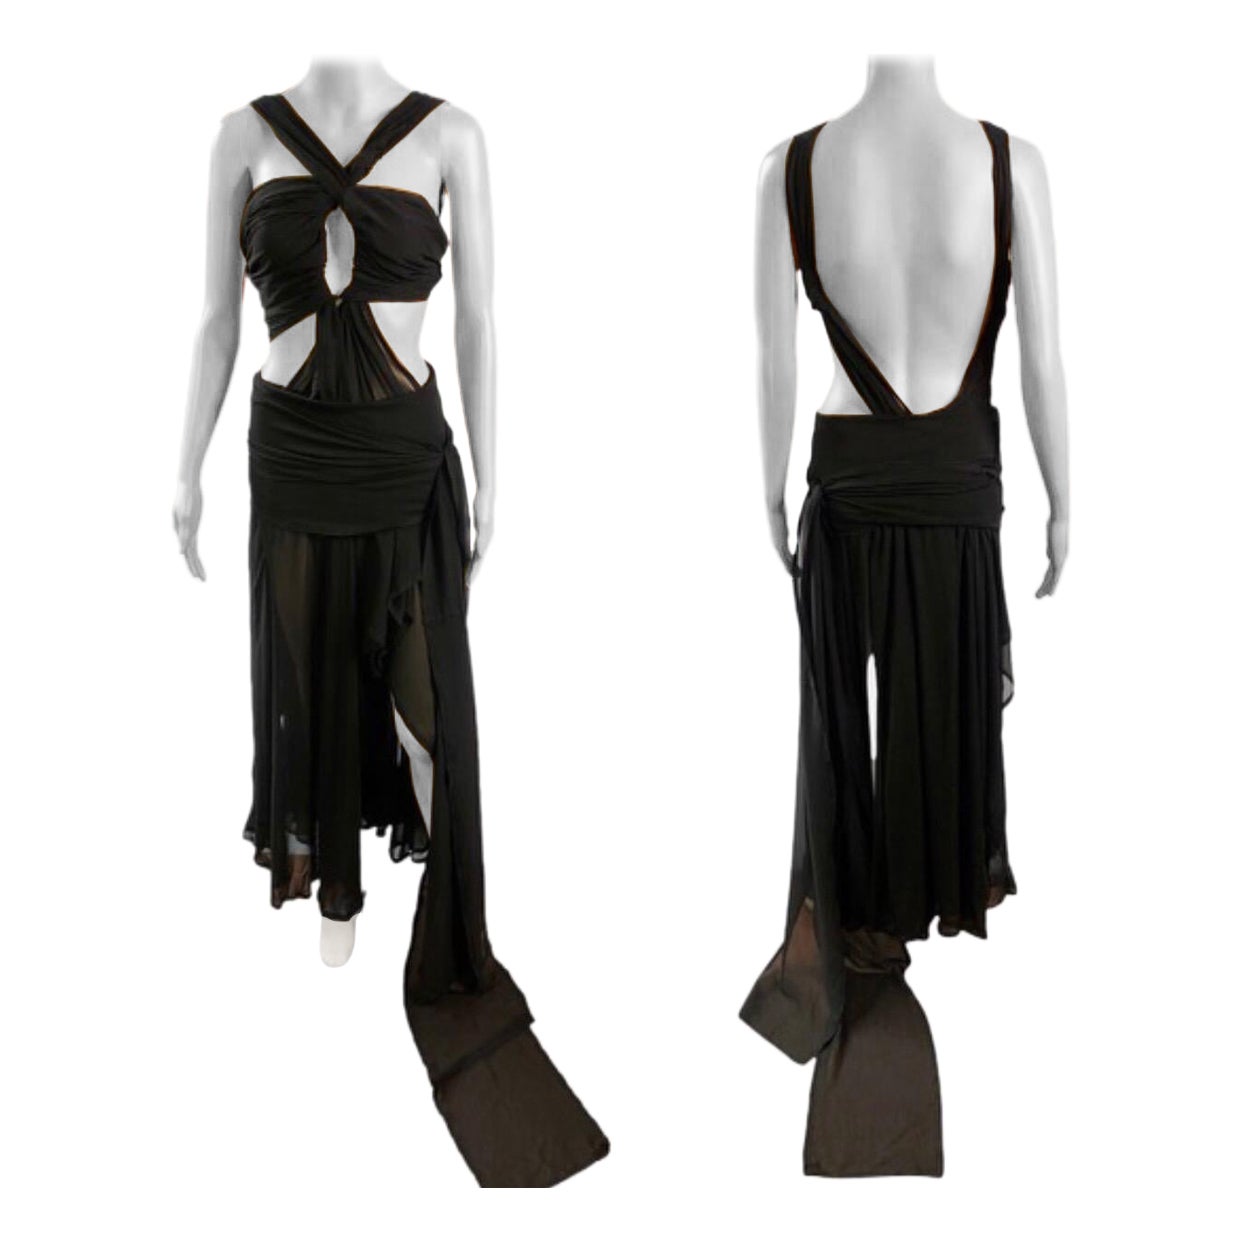 Tom Ford for Yves Saint Laurent S/S 2002 Runway Sheer Cutout Black Dress Gown